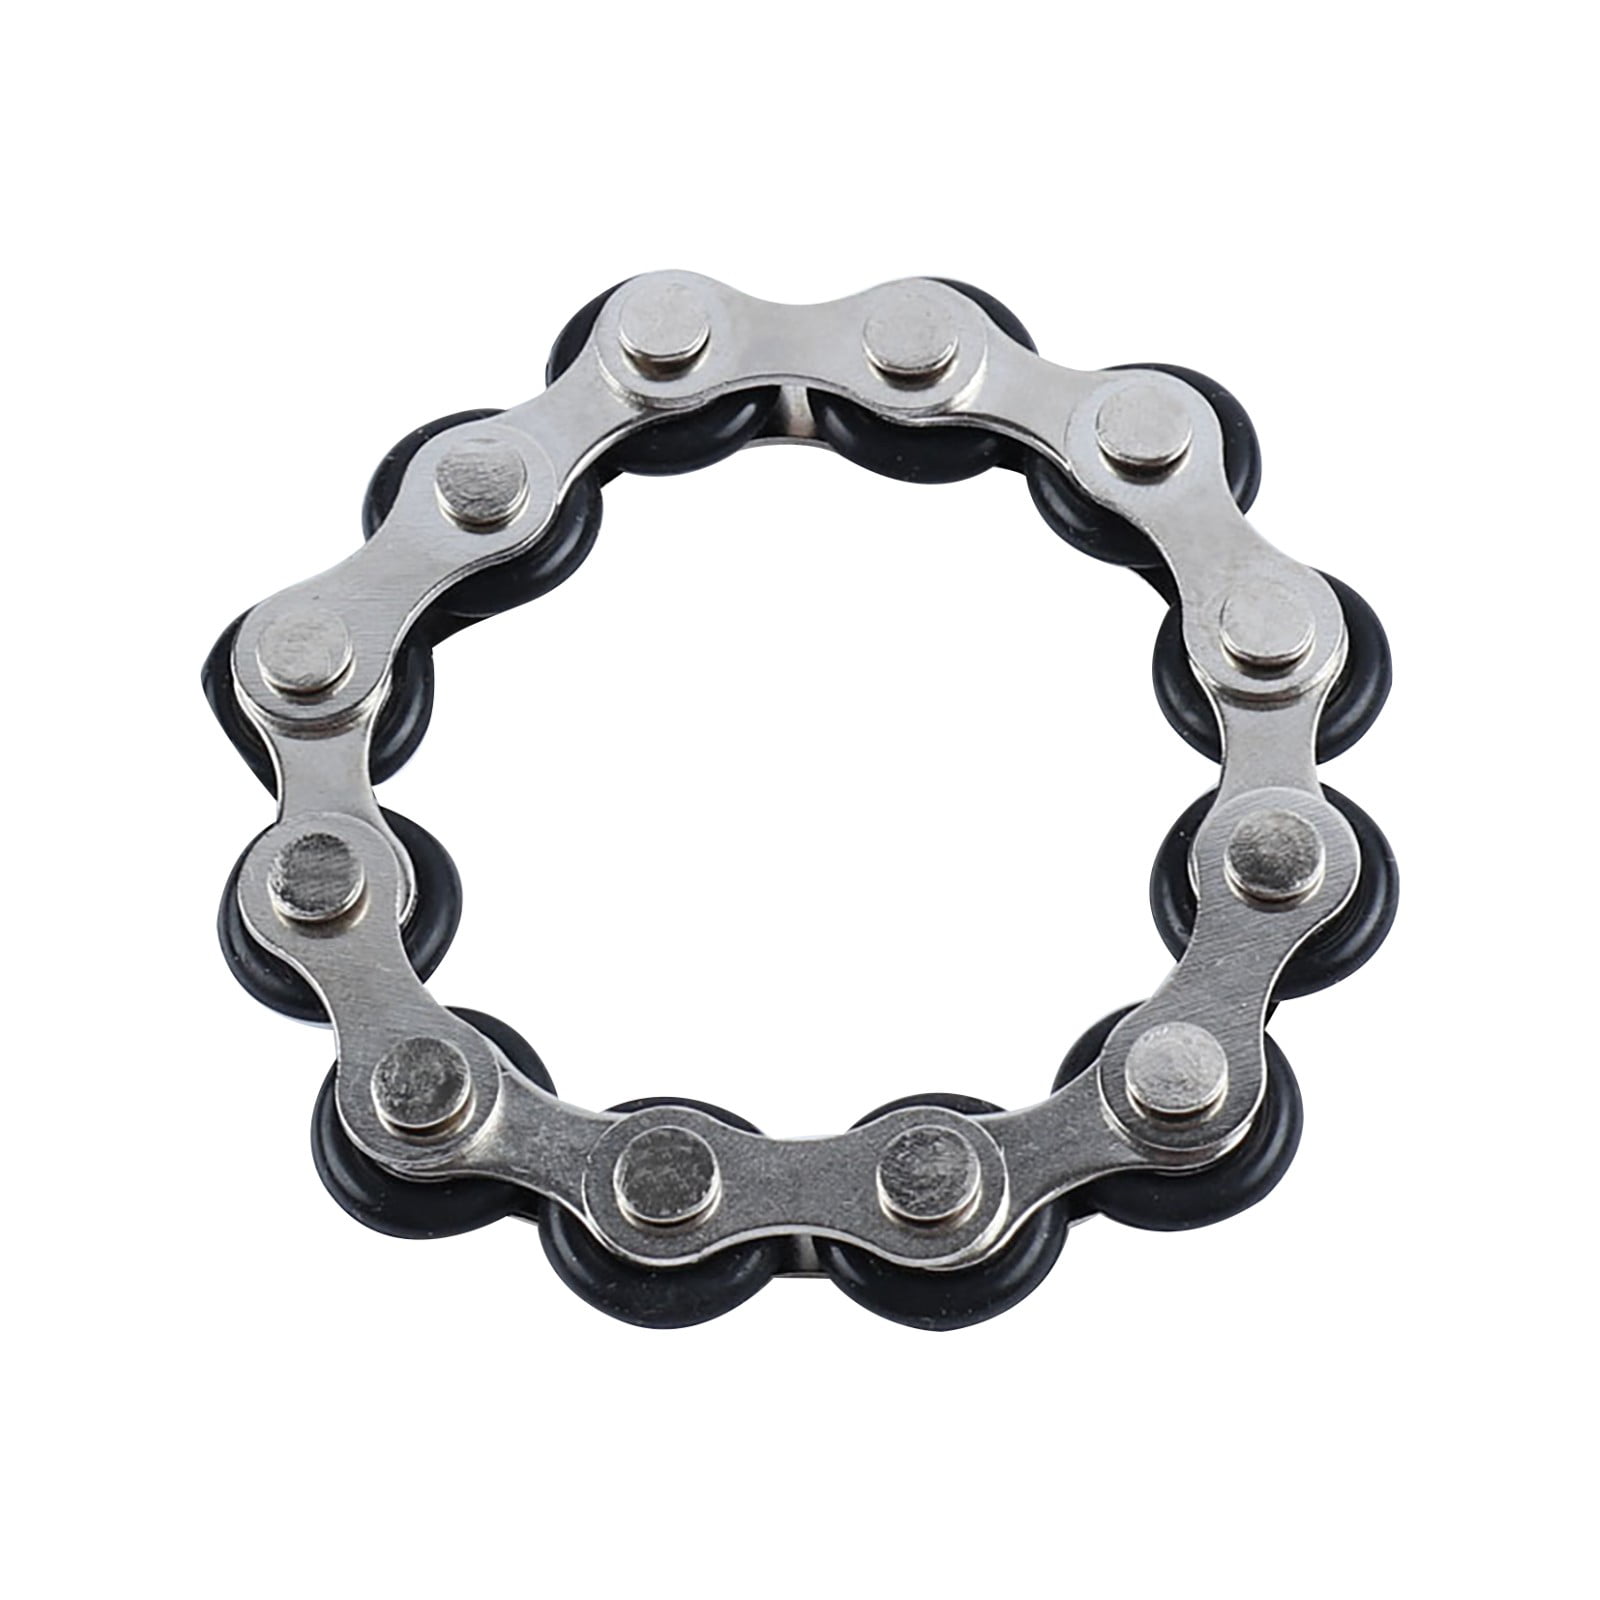 Bike Roller Chain Toy Fidget Toy for Autism ADD ADHD Stress & Idle Hands 